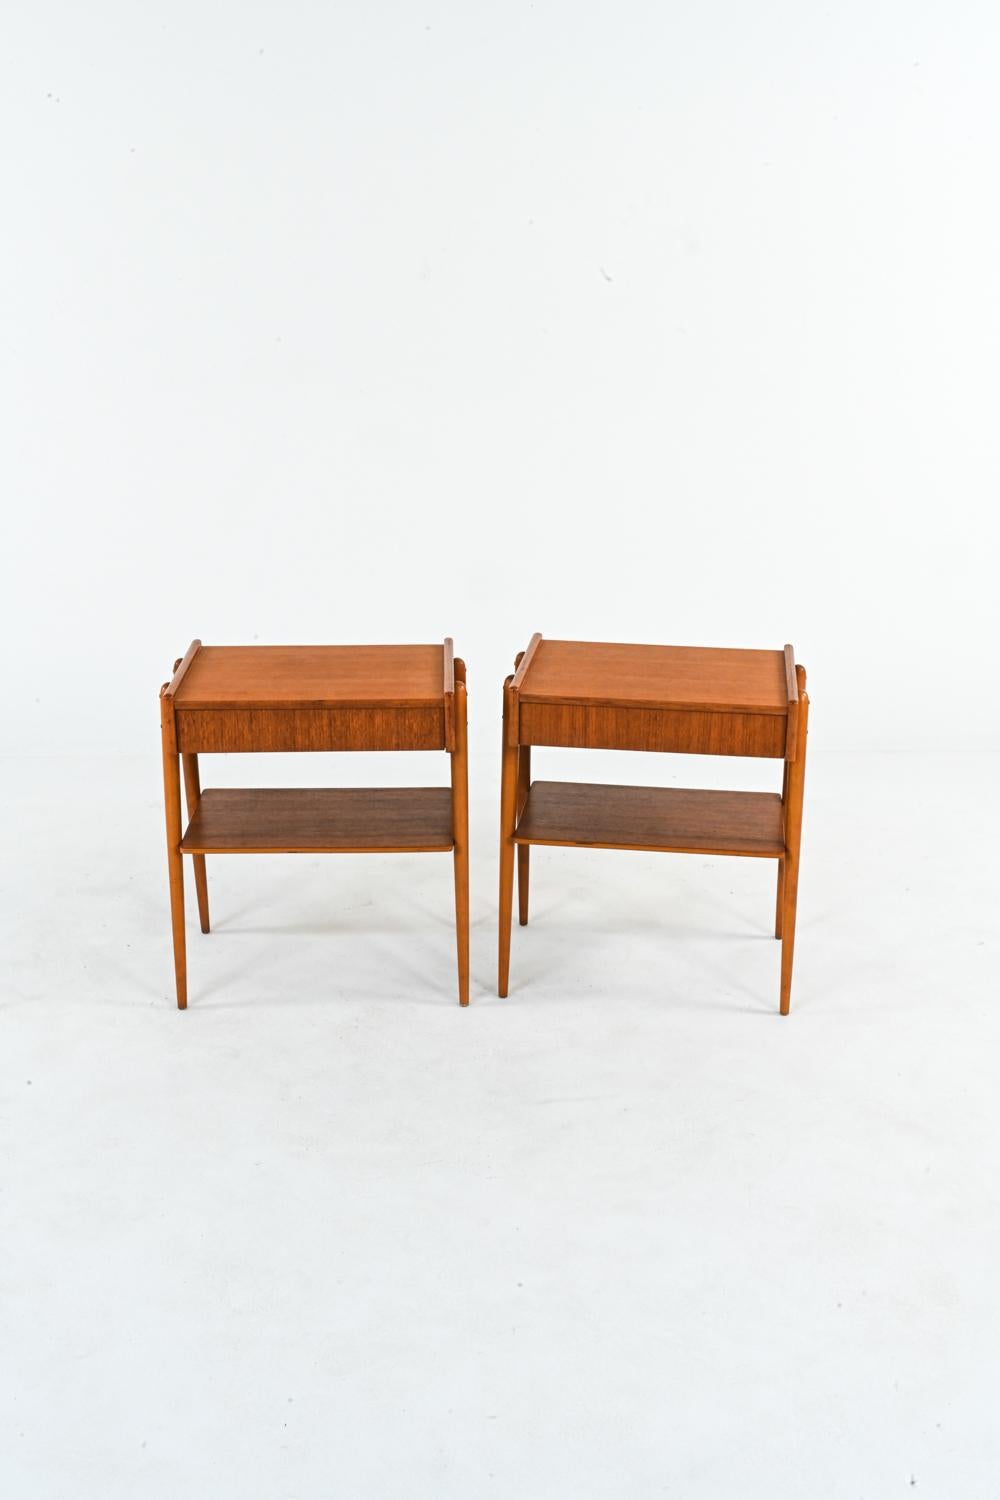 Mid-Century Modern Pair of Swedish Mid-Century Teak Nightstands or End Tables by Carlstrom & Co.